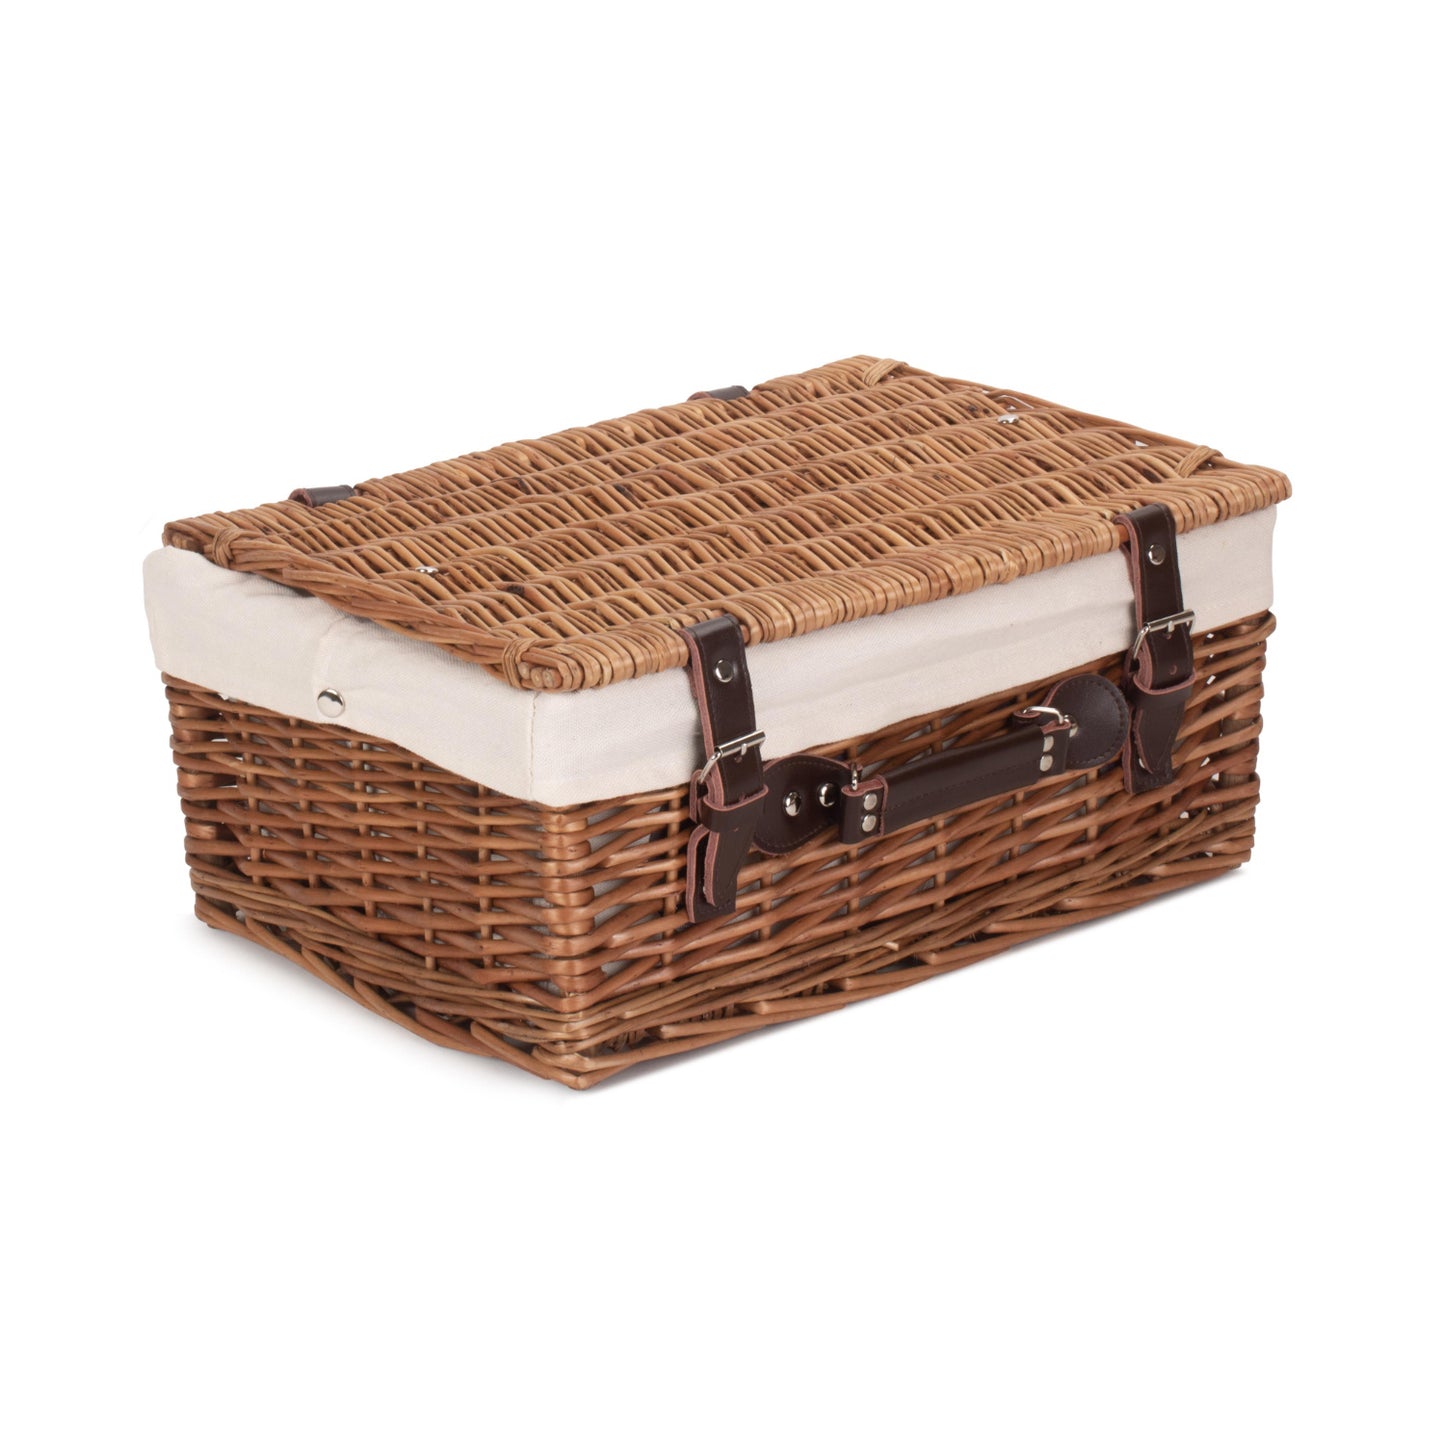 16 Inch Double Steamed Hamper With White Lining